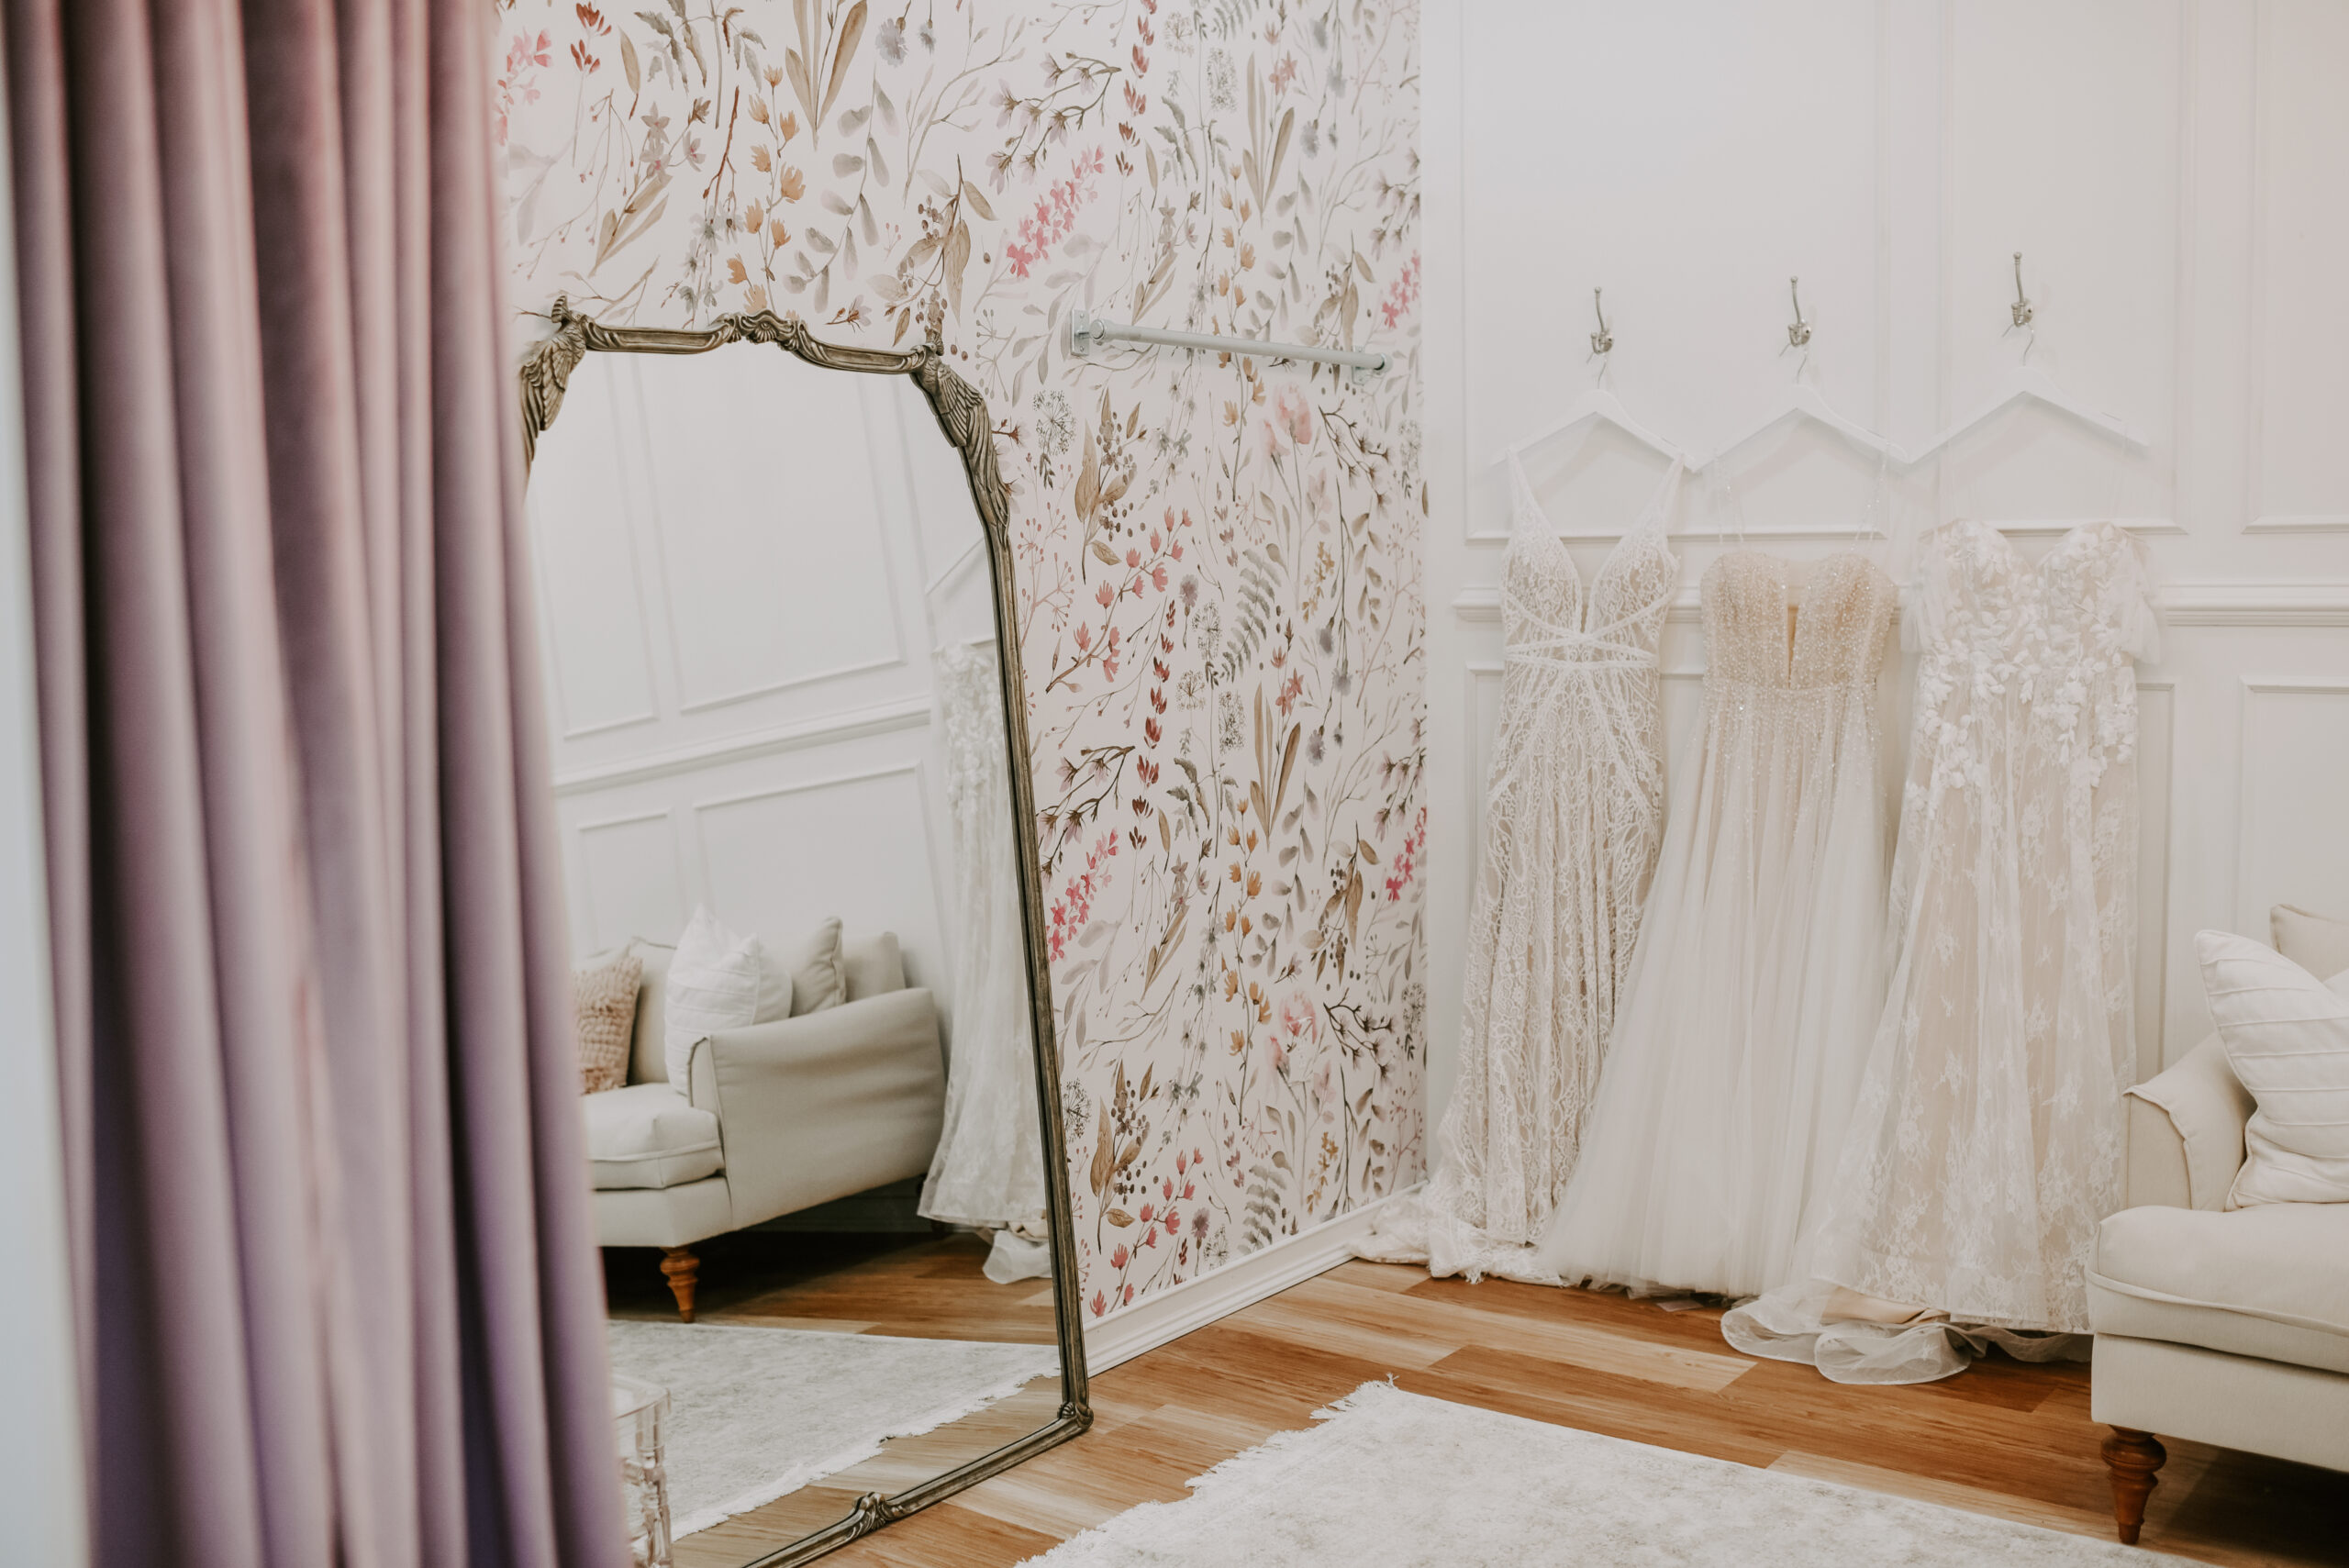 Reasons Why You Should Buy Your Wedding Dress from a Small Business